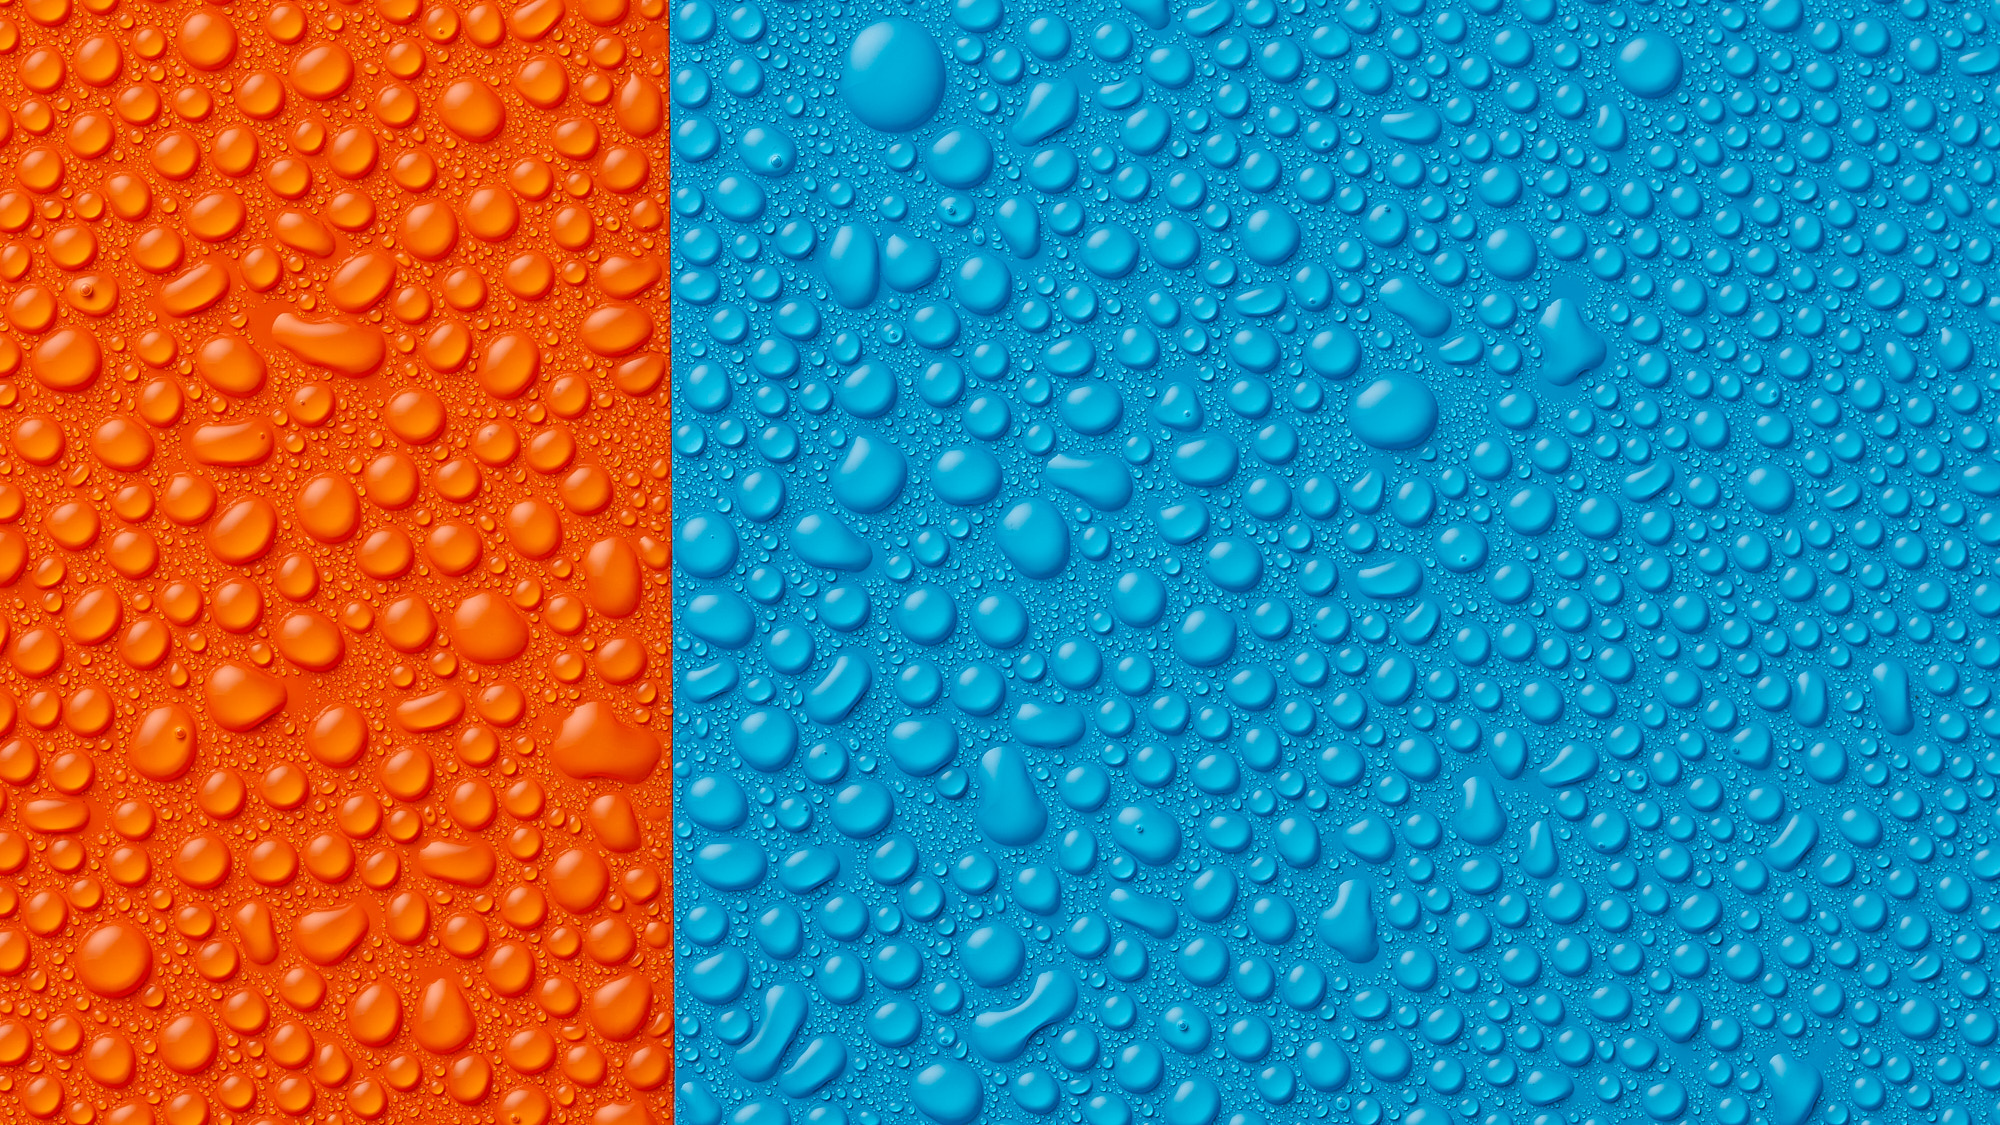 Fine art photograph of water droplets on a colored surface